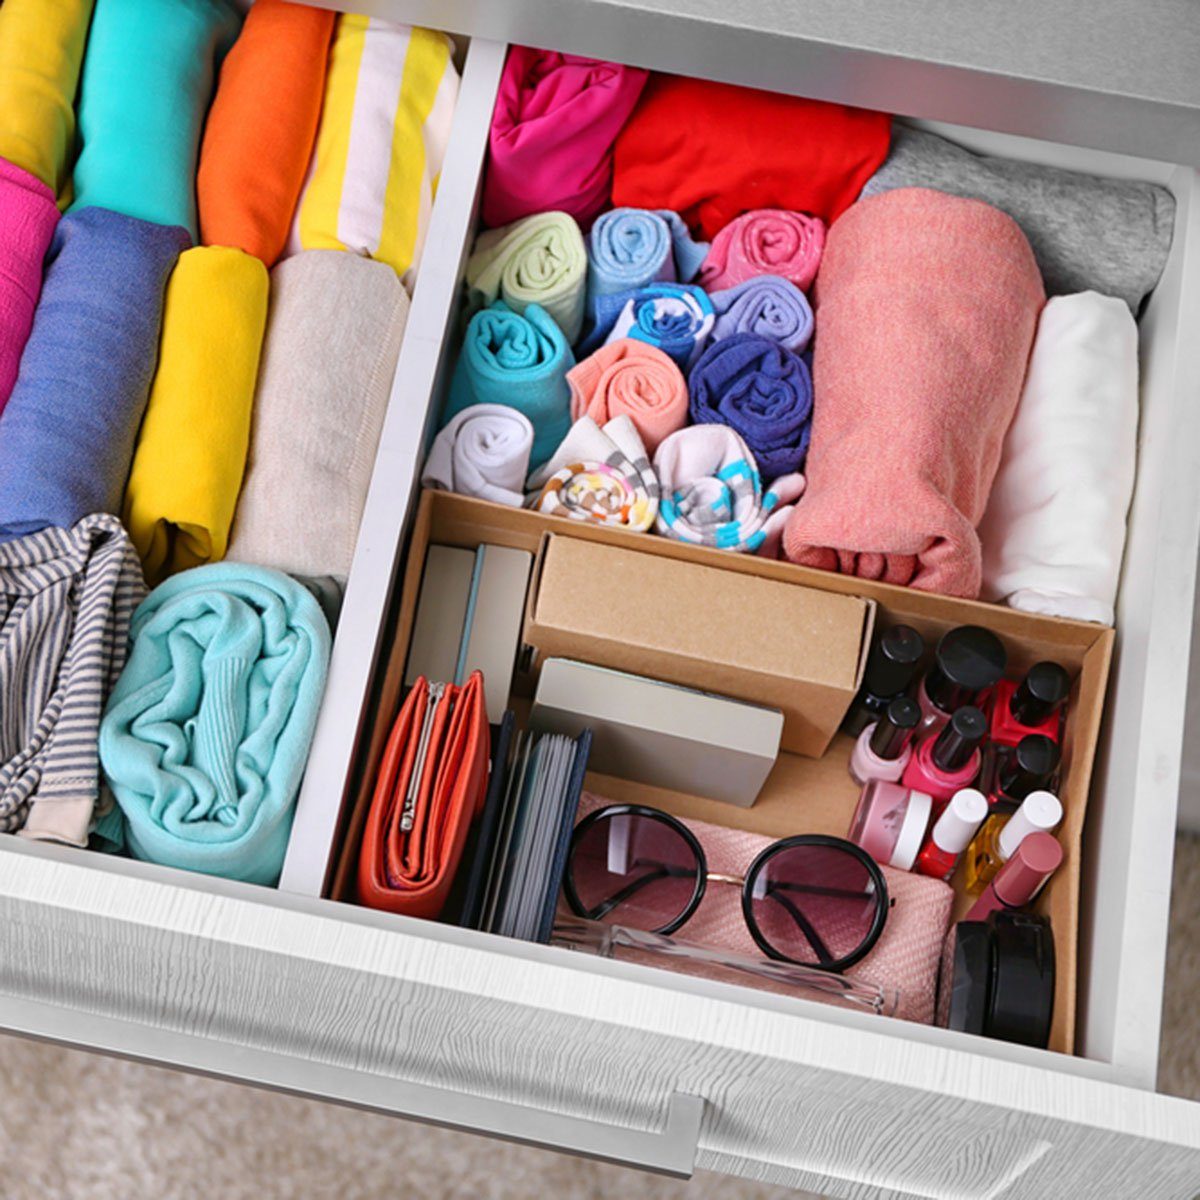 10 Marie Kondo Organization Tips That Will Change Your Life in Minutes